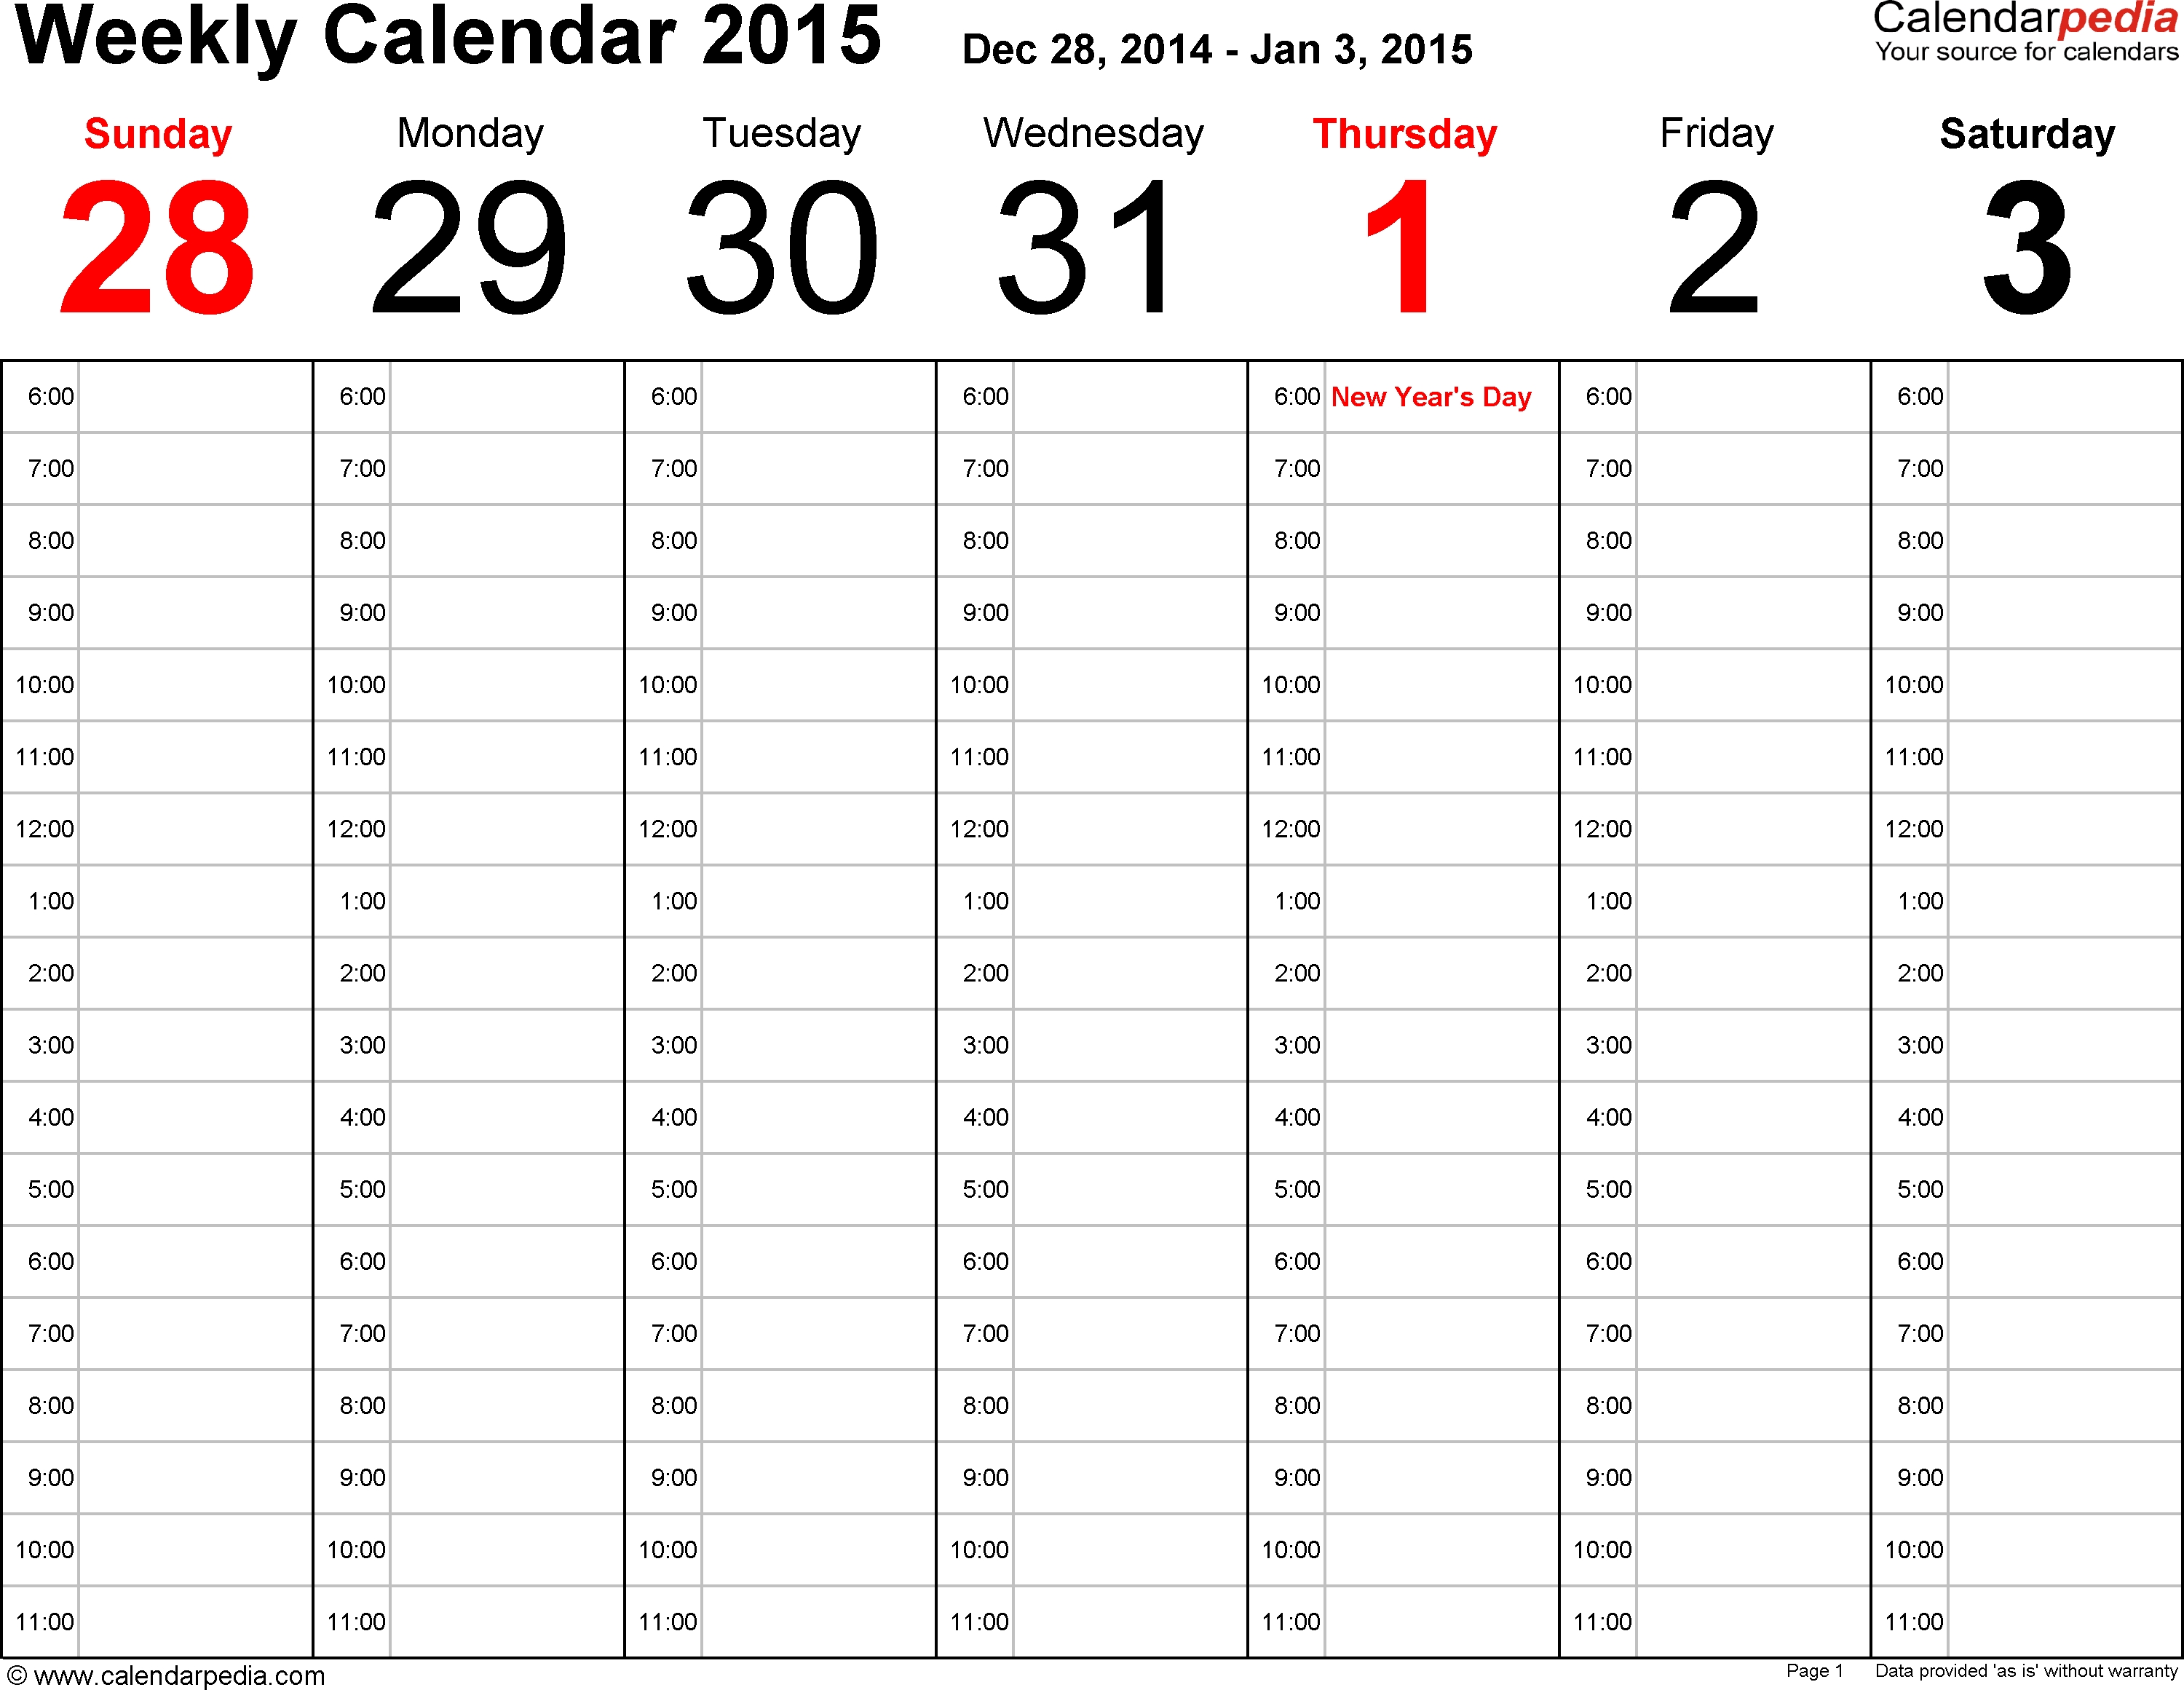 Weekly Calendars 2015 For Excel - 12 Free Printable Templates